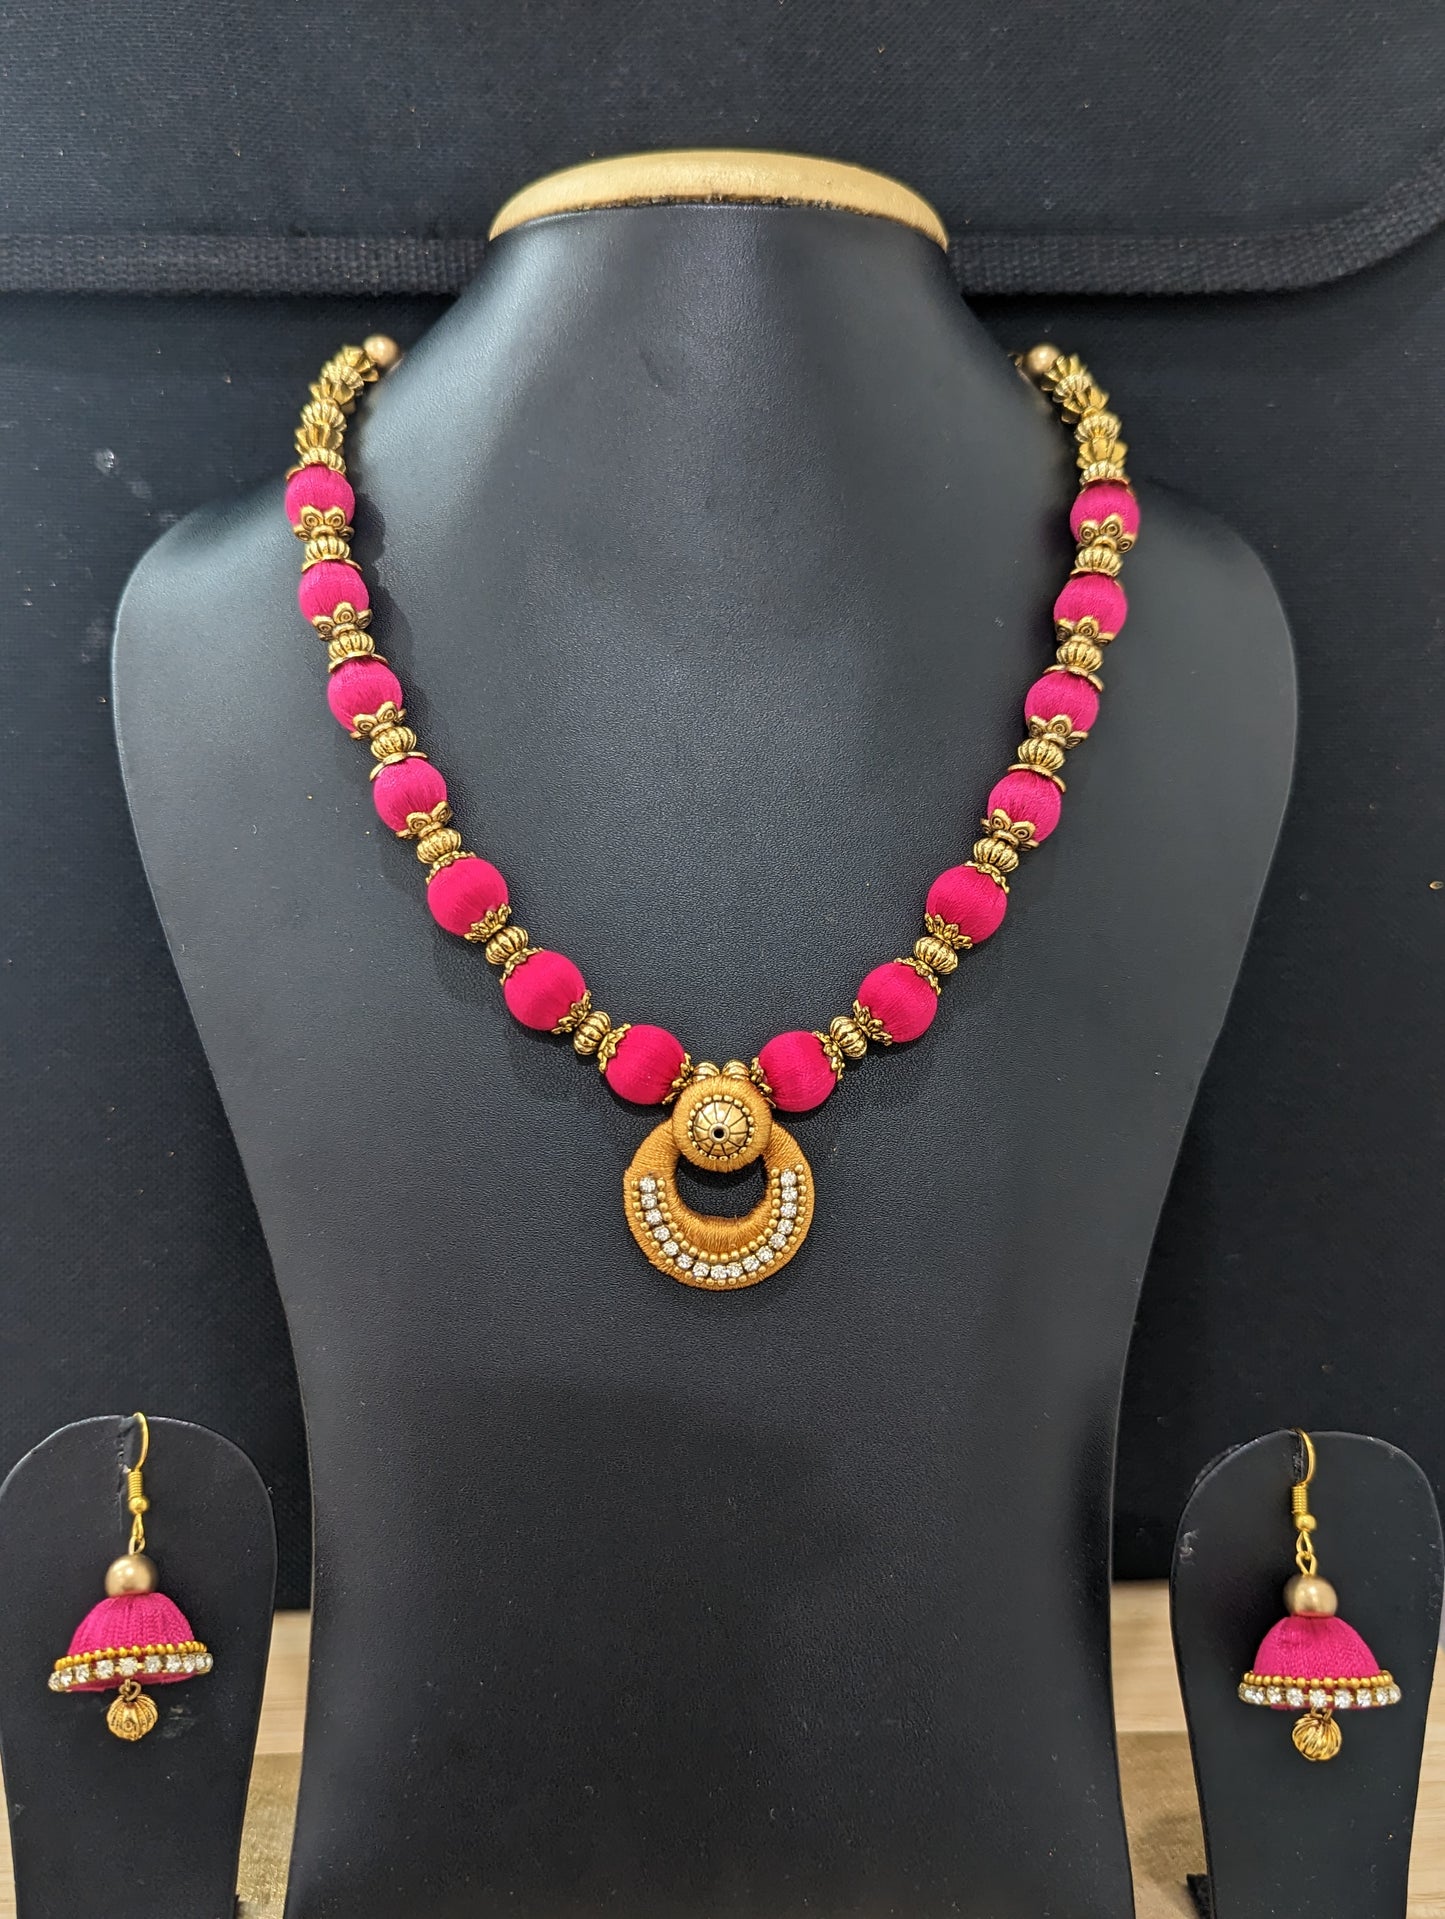 Silk Thread Pendant chain Necklace and Earrings Set